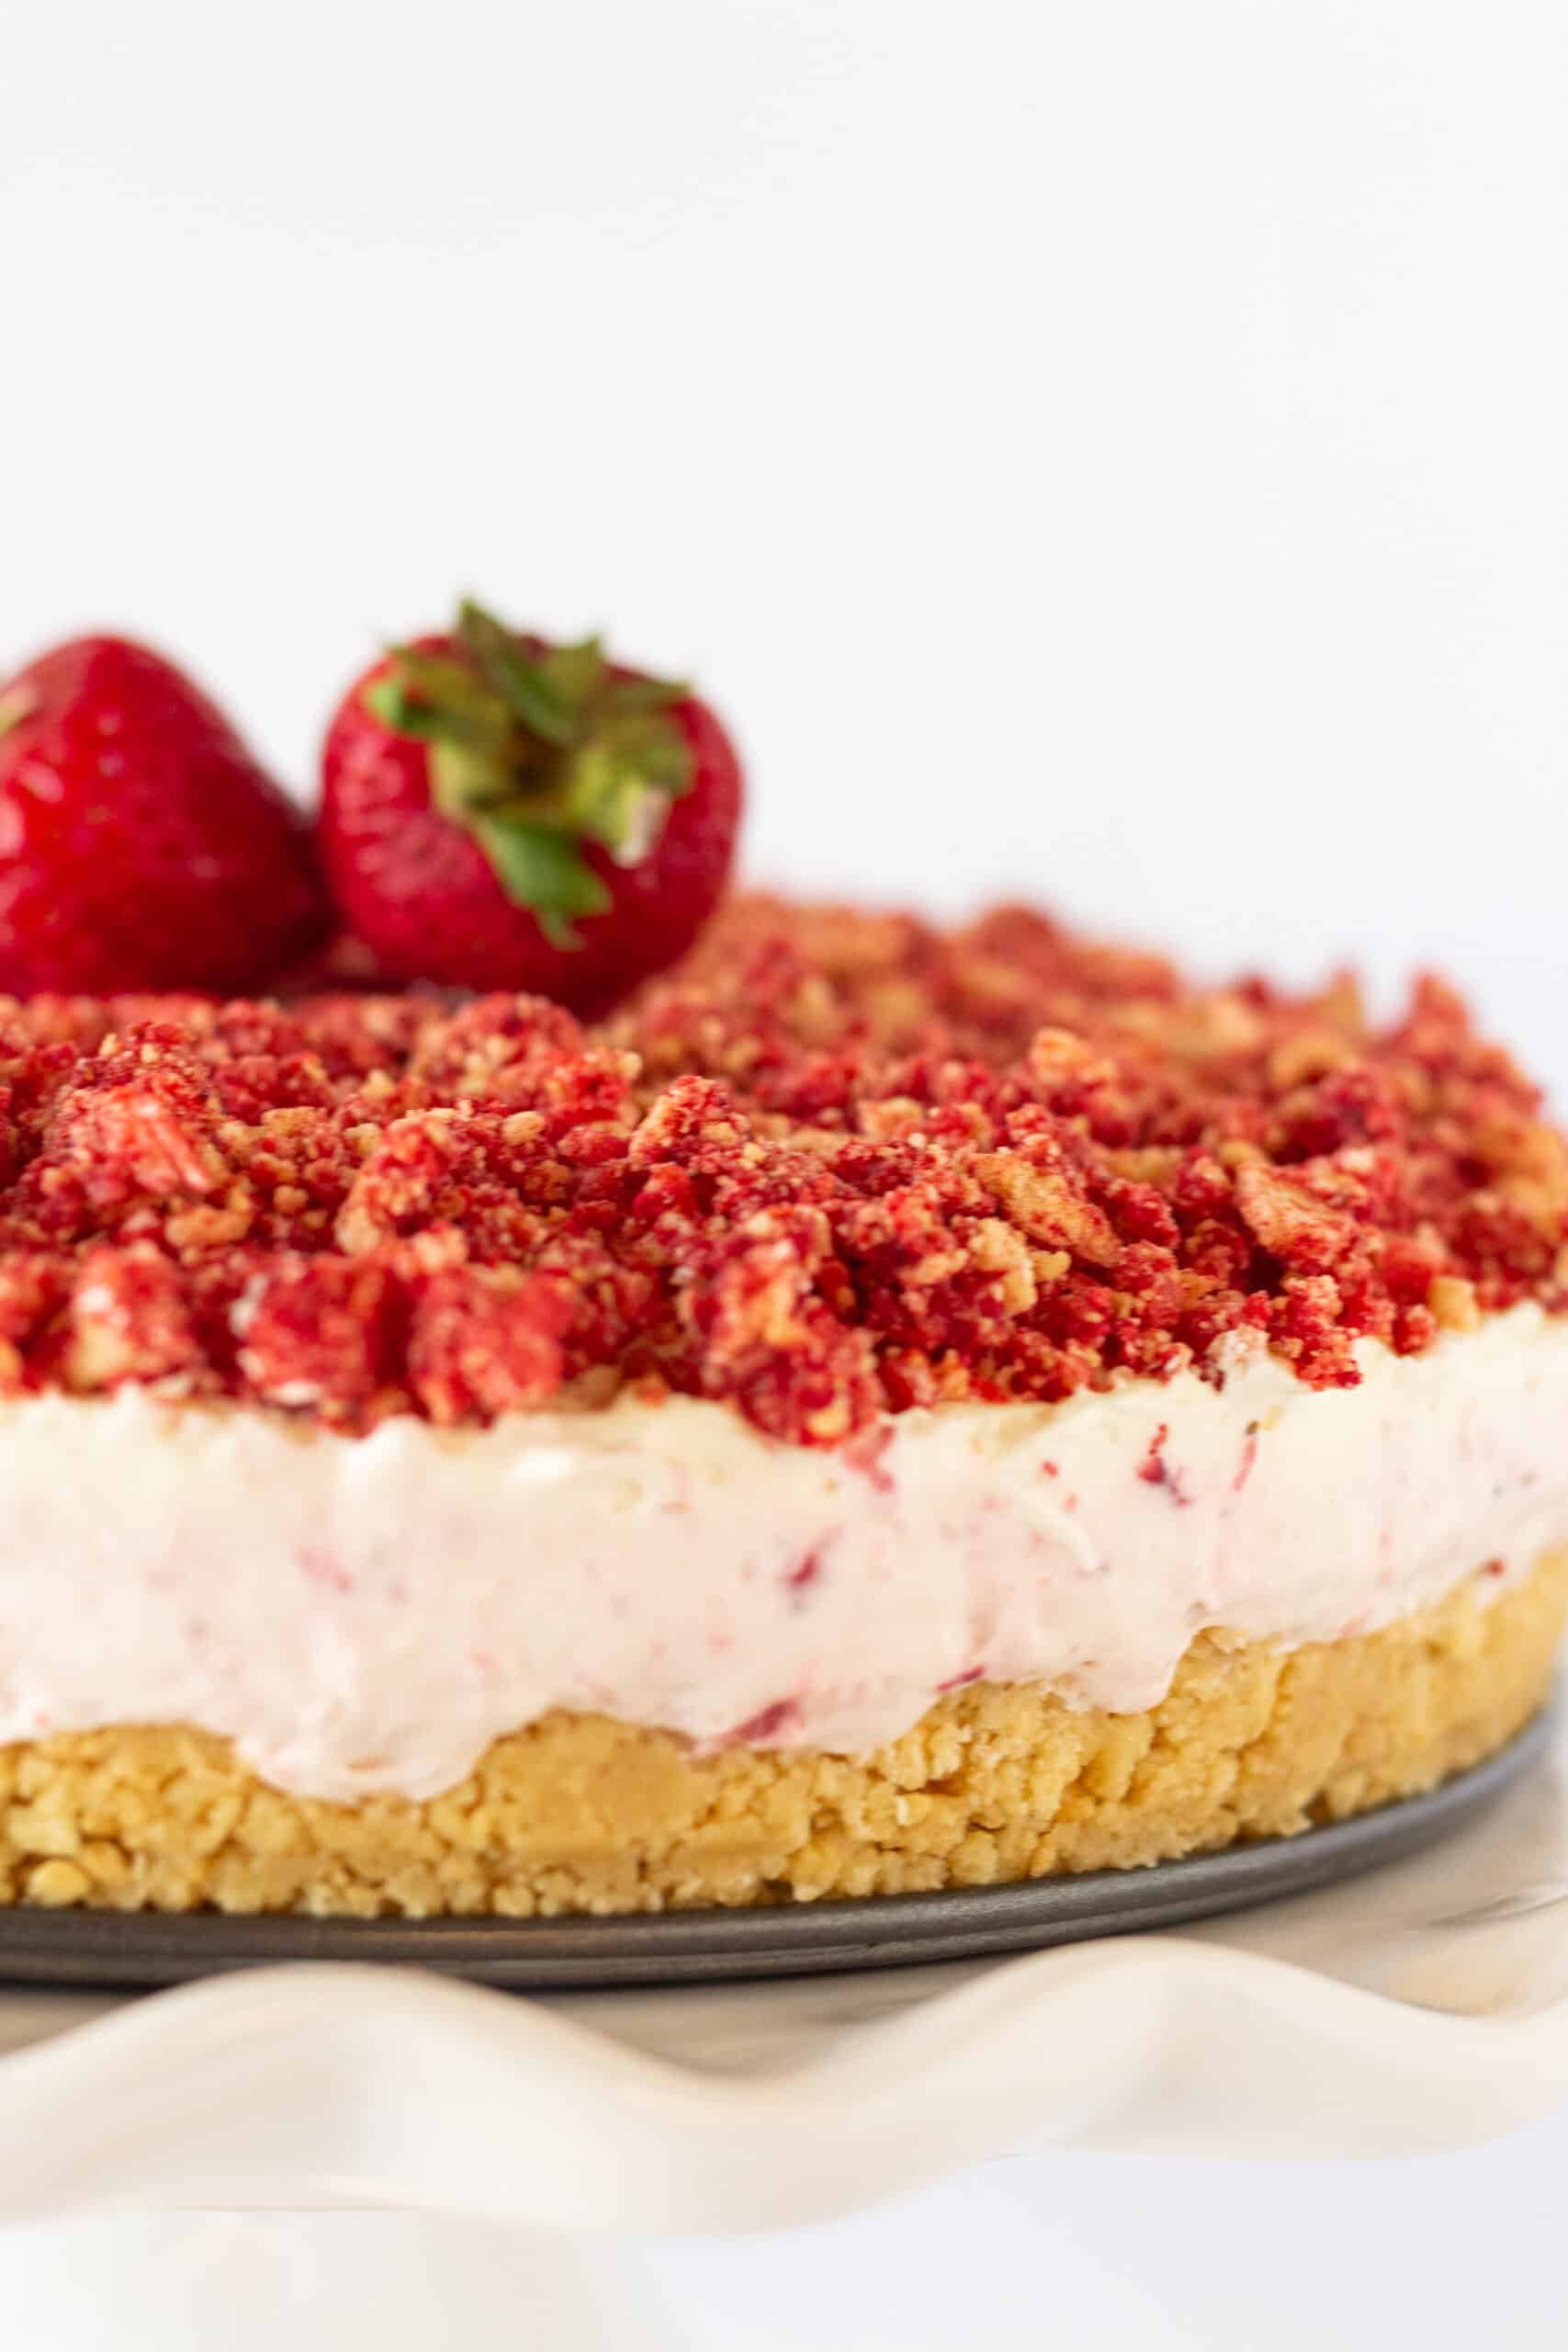 Strawberry Crunch Cheesecake recipe with a Golden Oreo Crust featured by top US dessert blogger, Practically Homemade